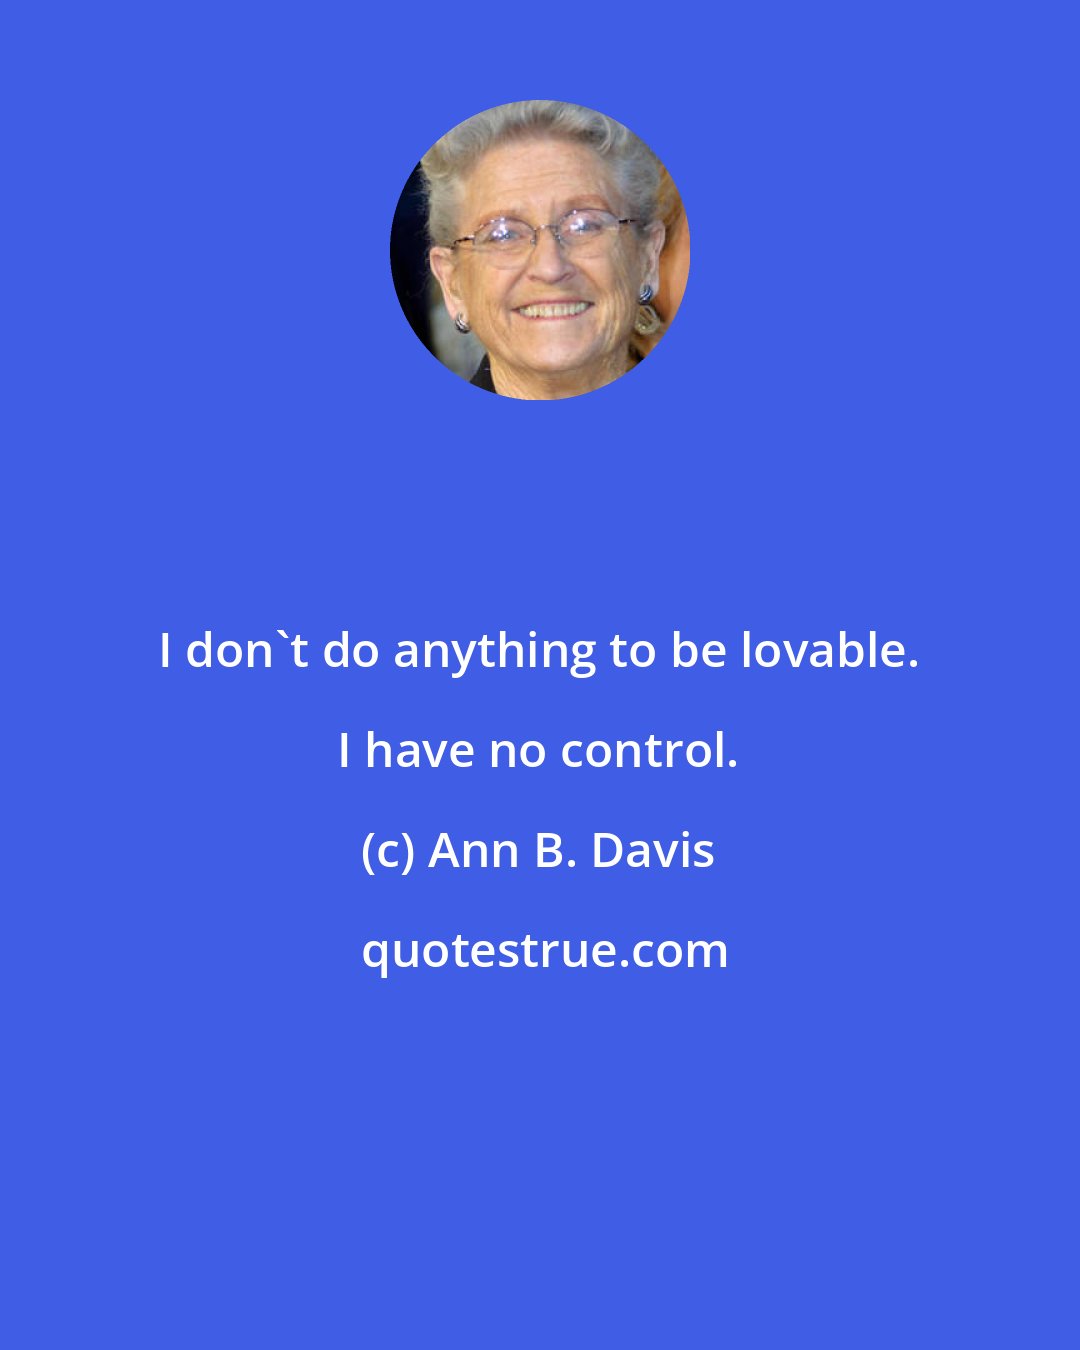 Ann B. Davis: I don't do anything to be lovable. I have no control.